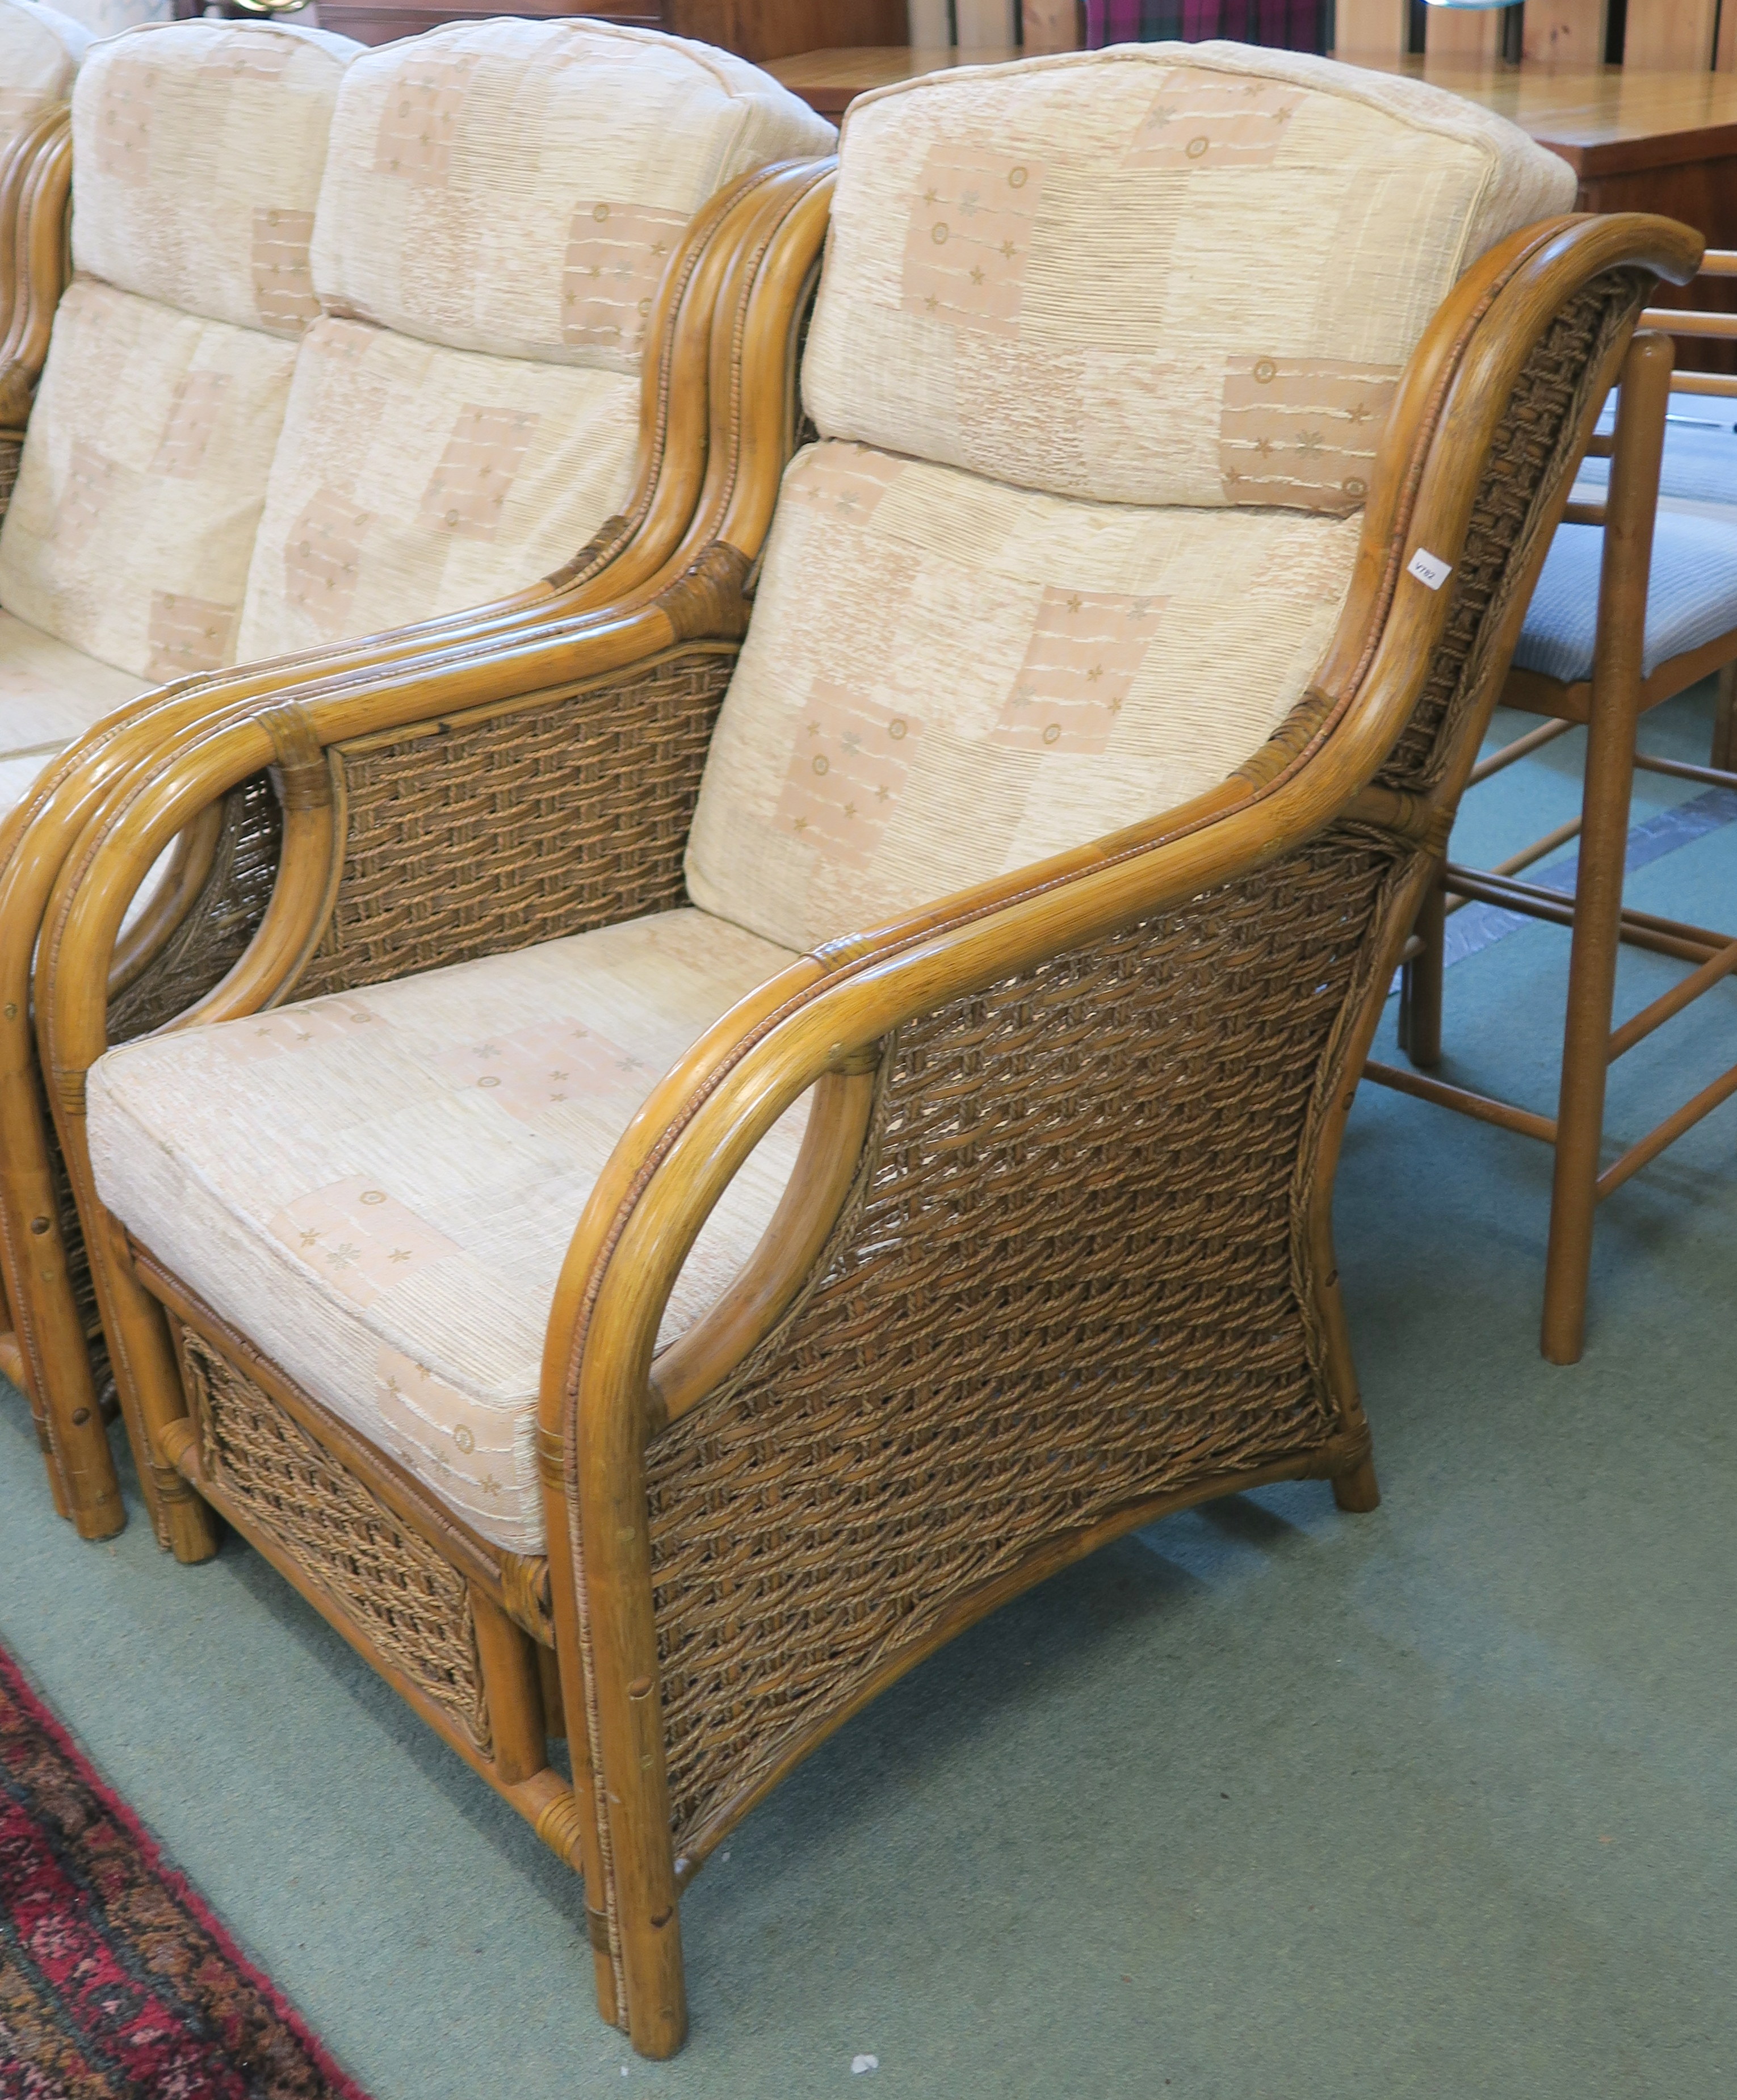 A cane three piece suite with two seater sofa and two chairs with a light fabric upholstery (3) - Image 2 of 2